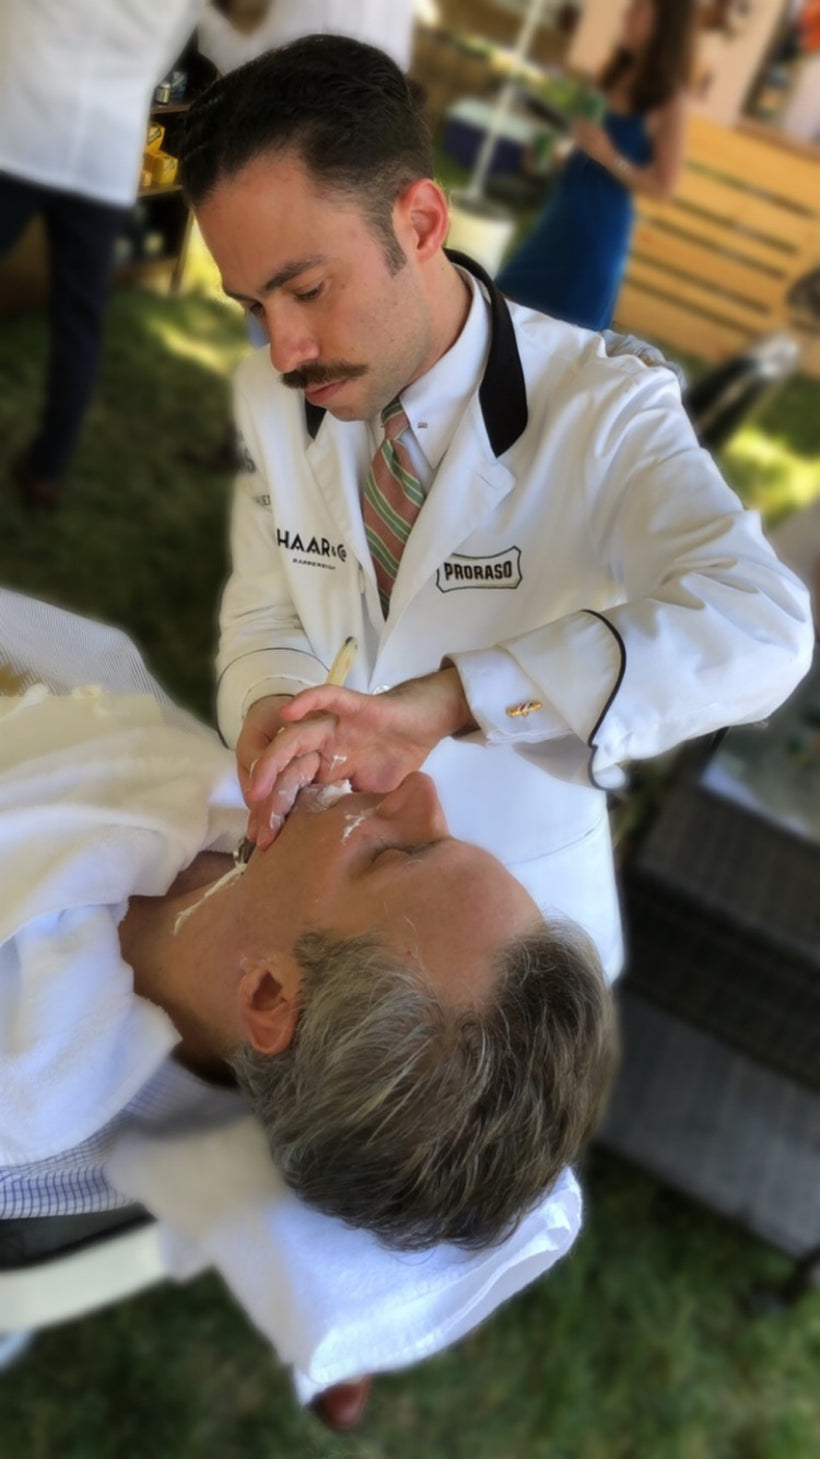 Proraso Master Barber Michael Haar shaving a client who is reclined in a barber chair